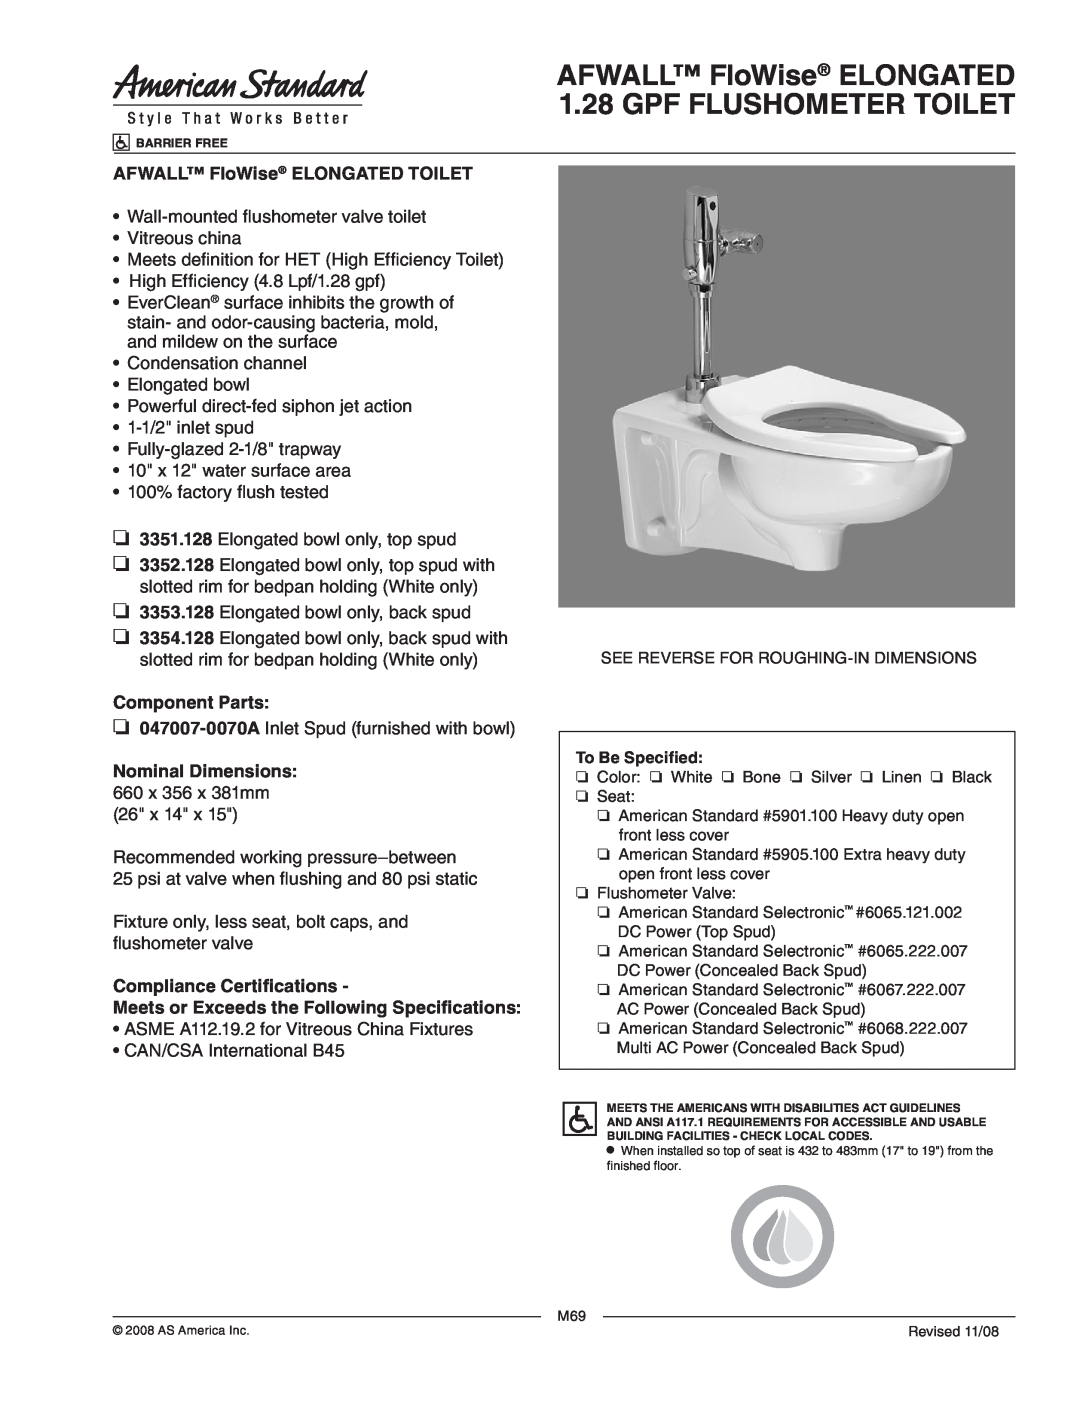 American Standard 3353.128 dimensions AFWALL FloWise ELONGATED TOILET, Component Parts, Compliance Certifications 